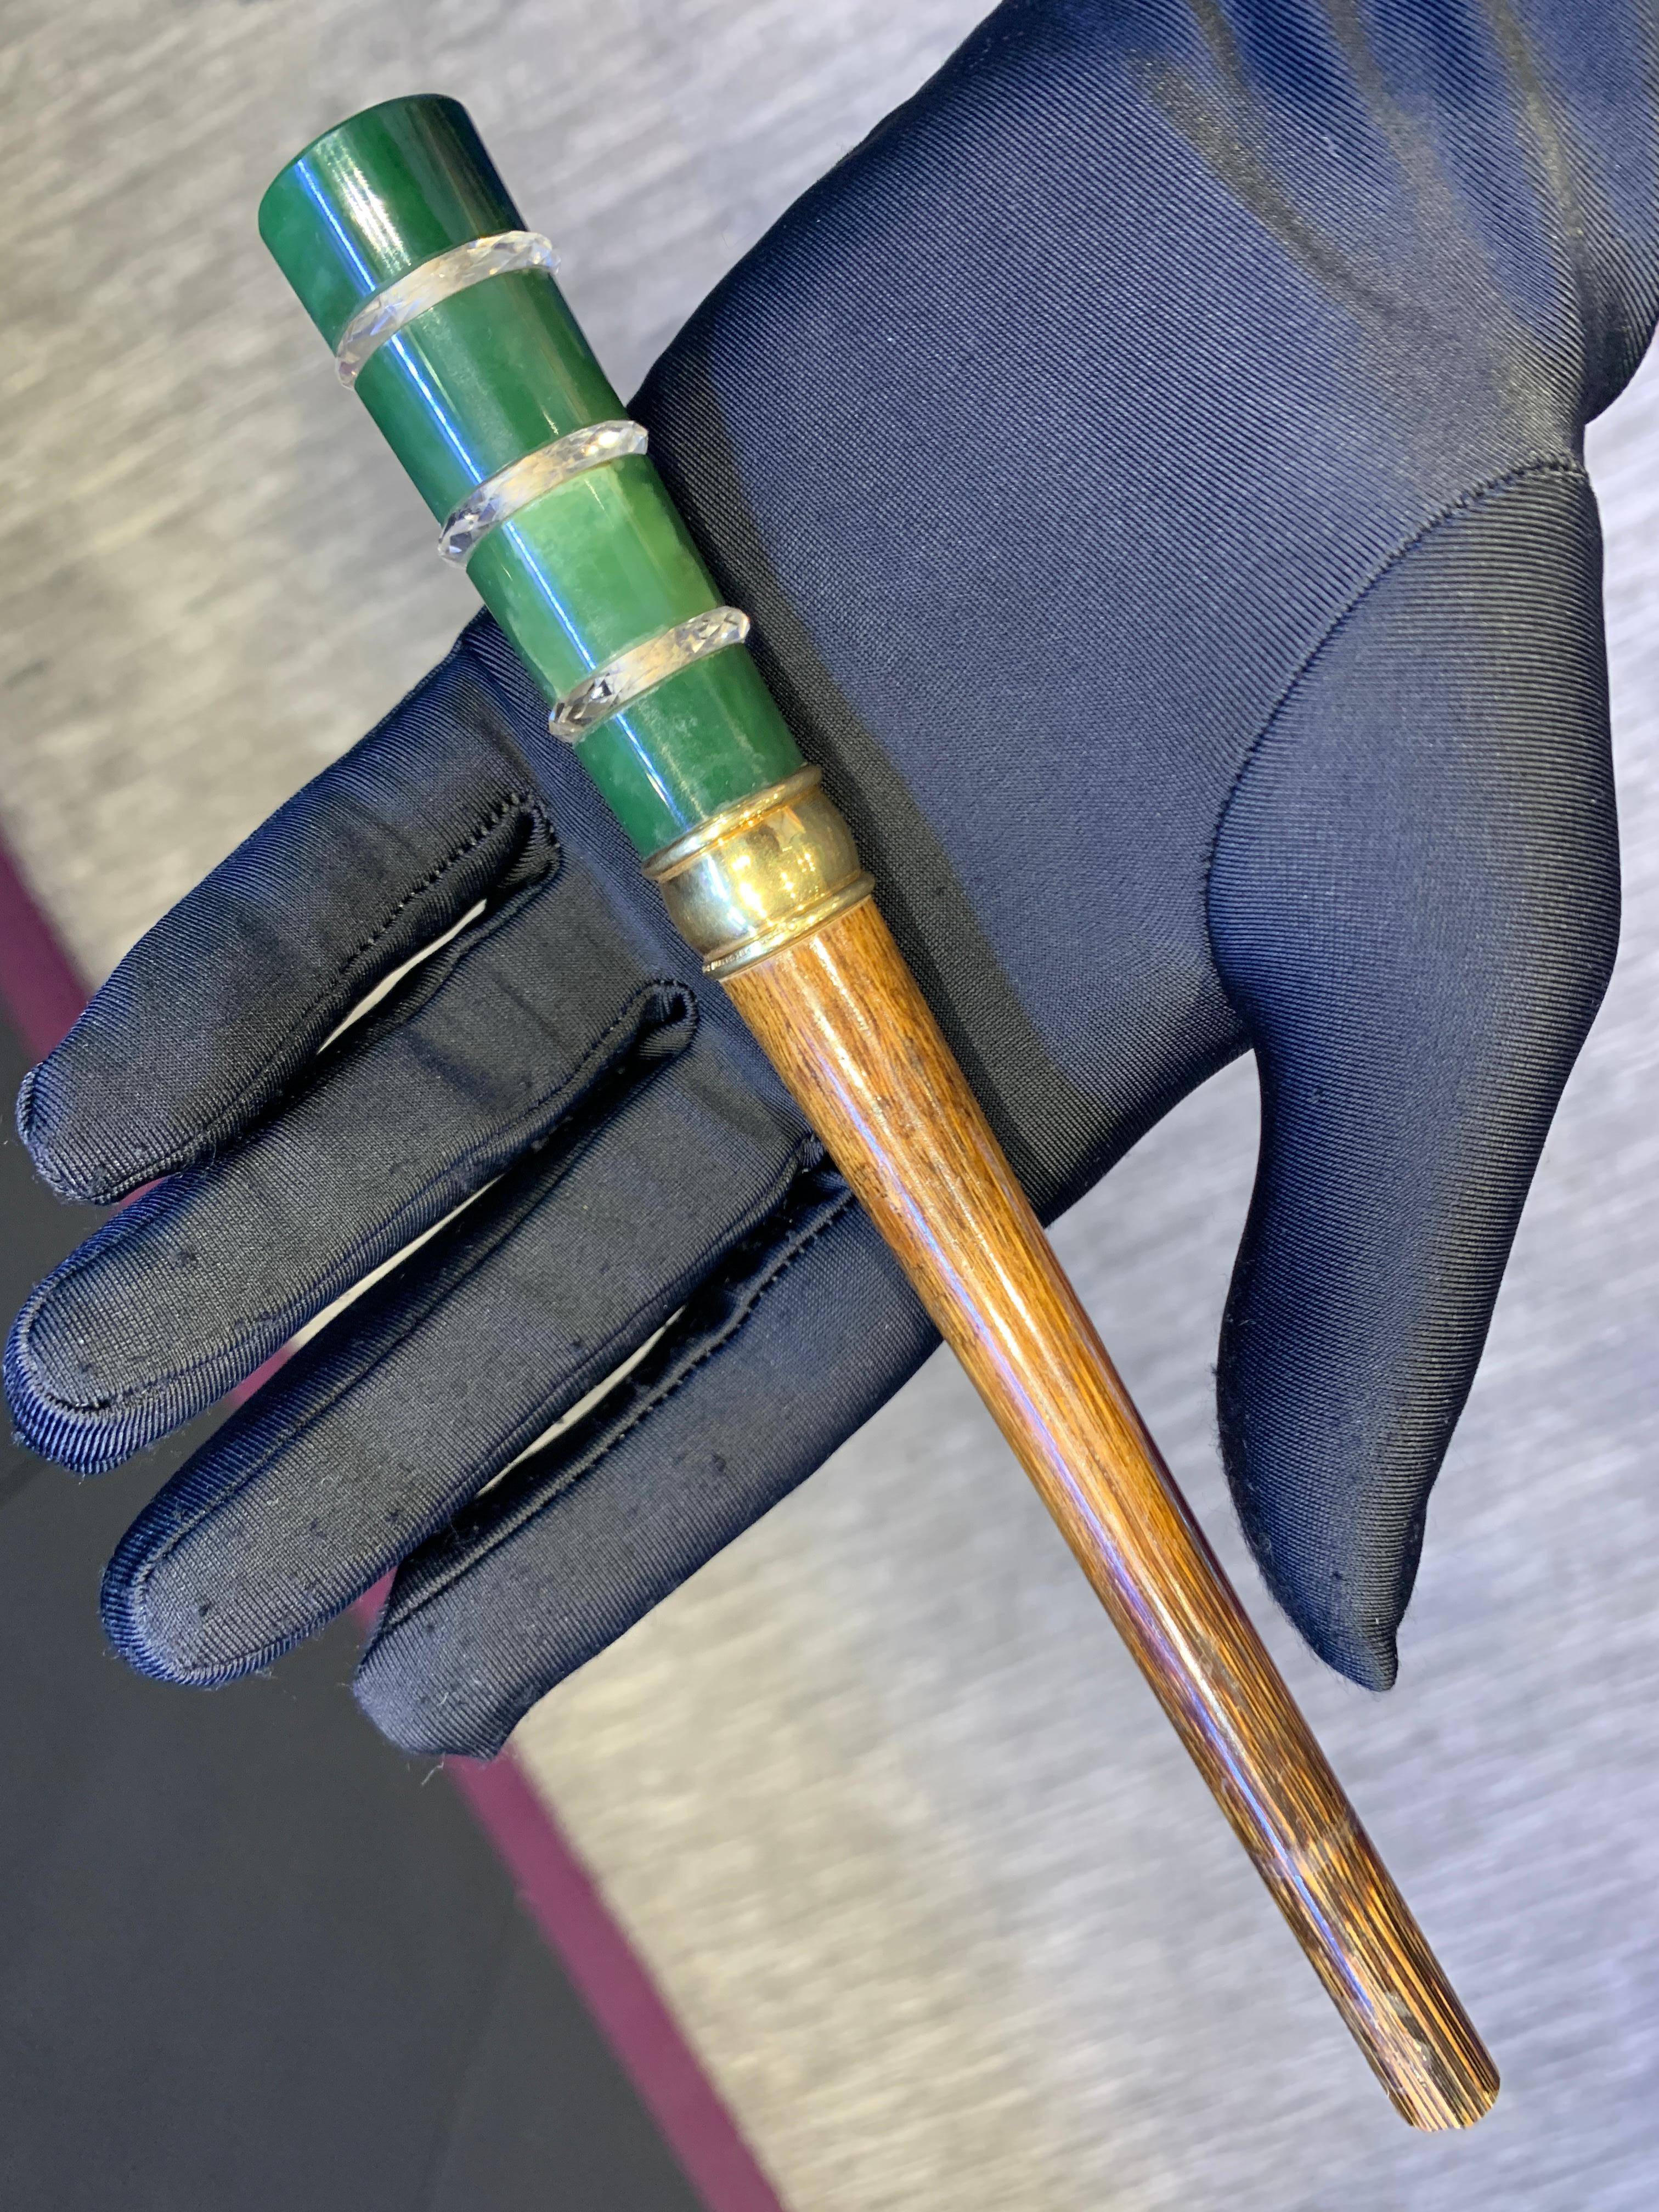 Art Nouveau Tiffany & Co. Parasol Handle

A parasol handle made of 18 karat gold, jade, rocky crystal and wood made circa 1900

Signed Tiffany & Co.
Stamped 18 KT. Gold

Length: 8.5